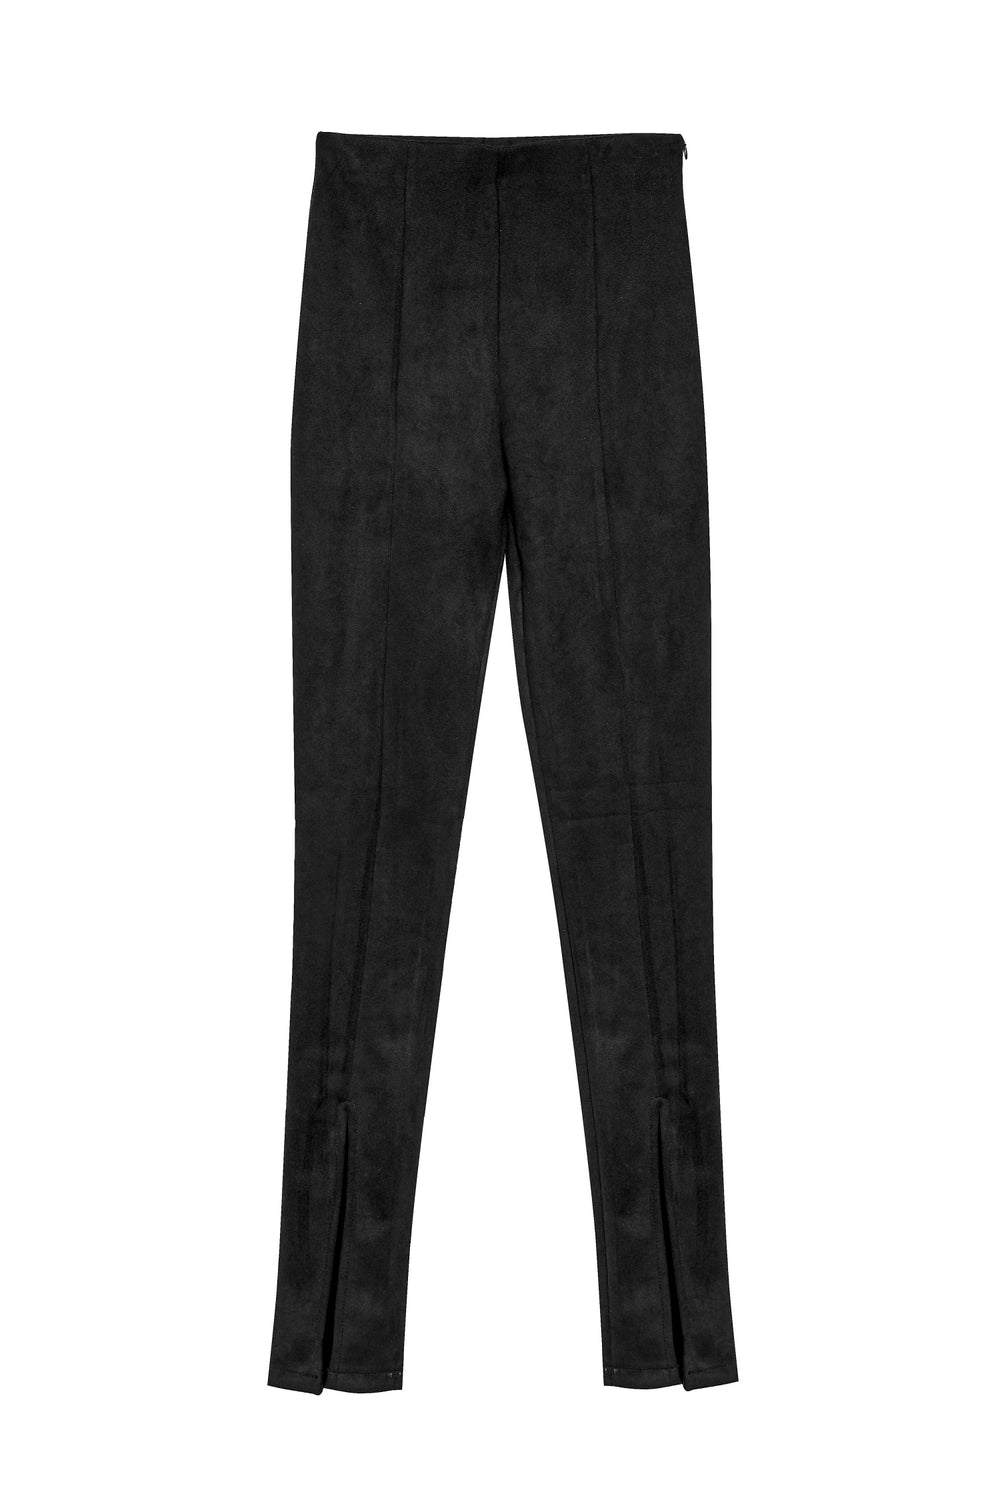 Slit Suede Trousers Black